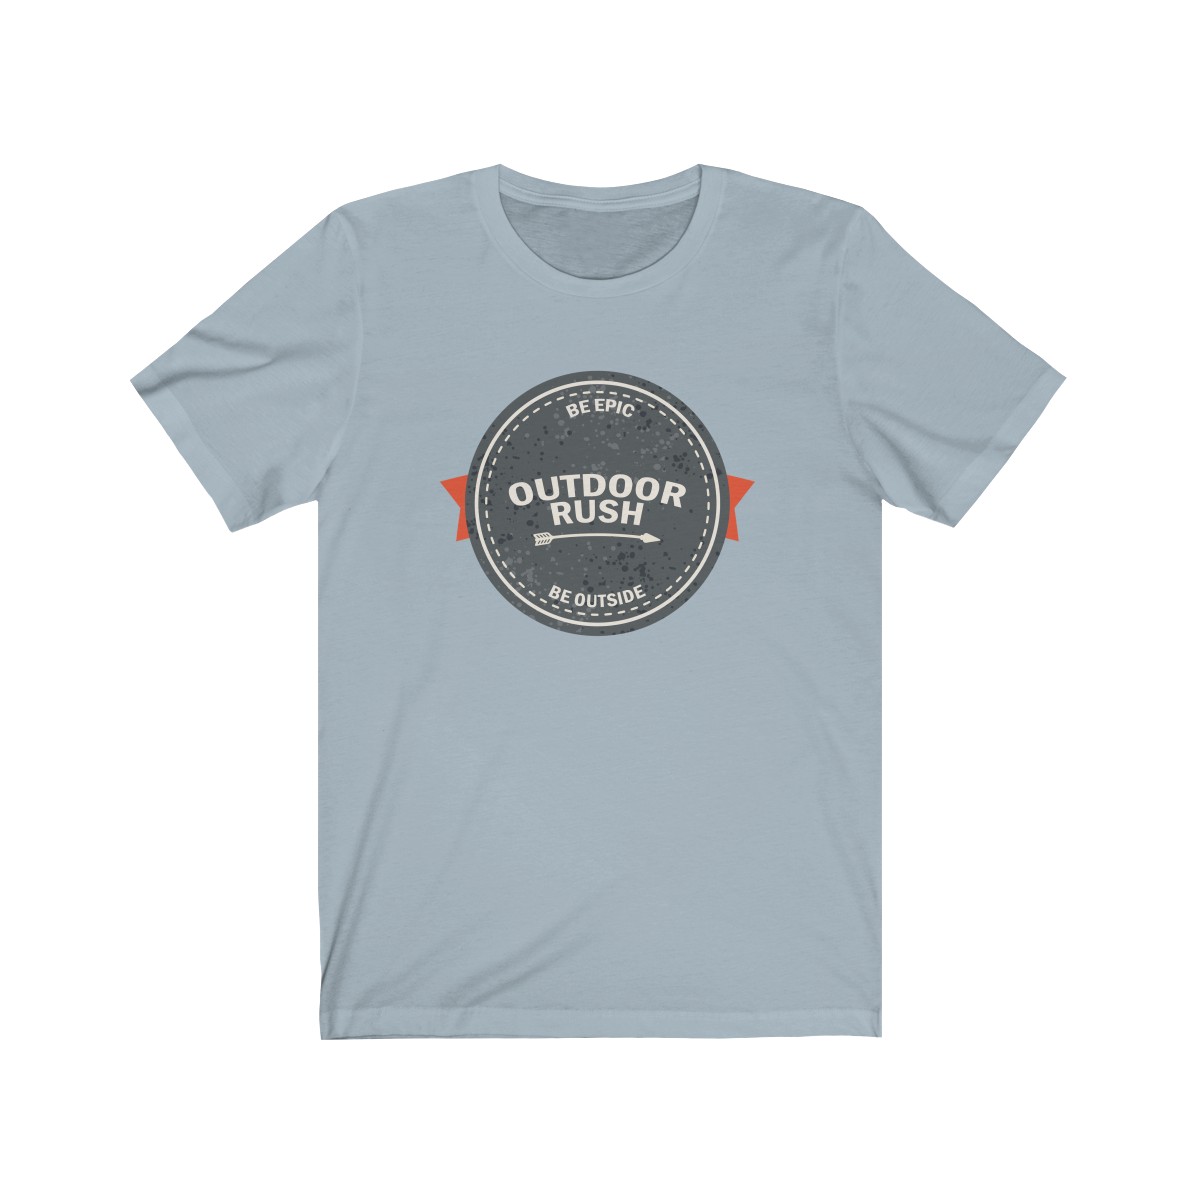 Featured image for “Vintage Be Epic Be Outside - Unisex Tee”